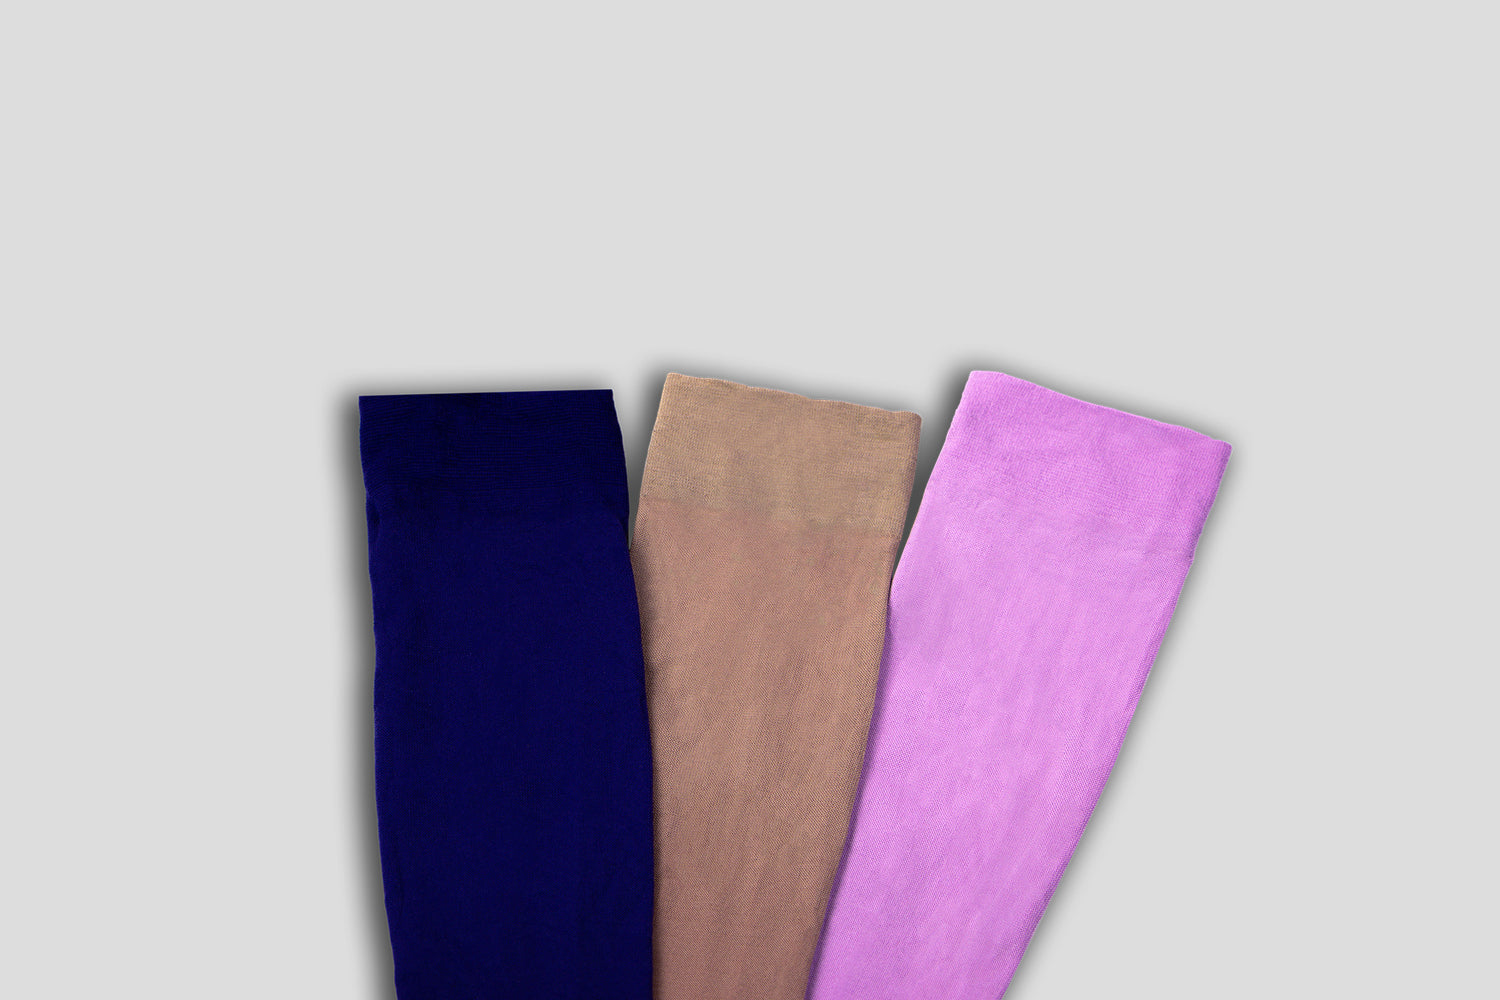 Close Look To Compression Stockings Fabric Presented in 3 Colors - Light Grey Background